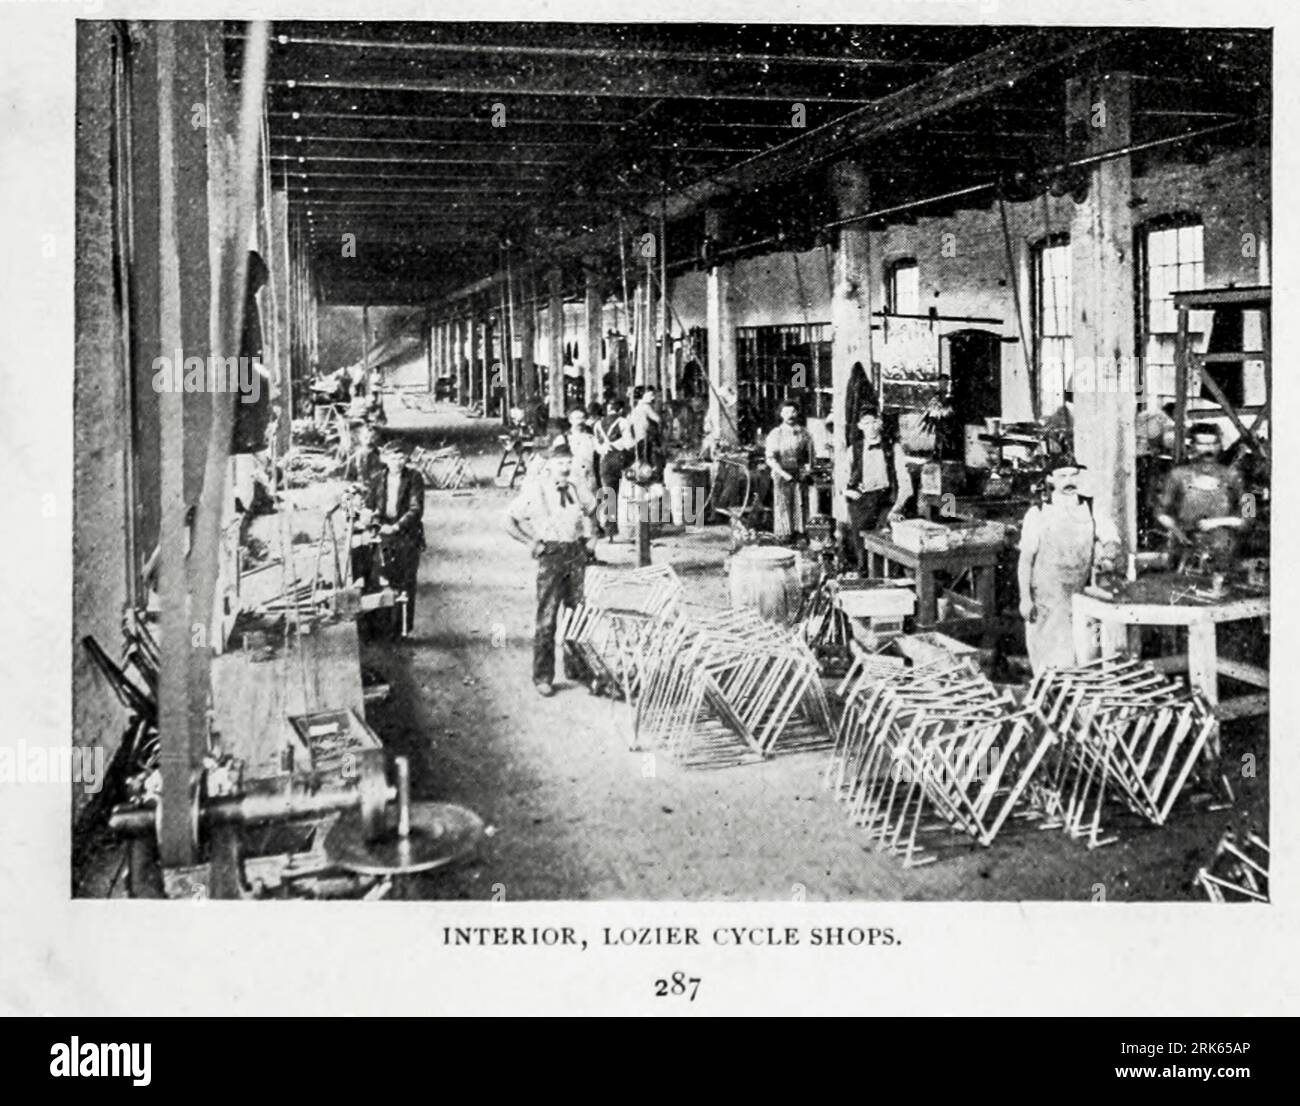 Interior Lozier Cycle Shops, Toledo, Ohio from the Article MODERN MACHINE-SHOP ECONOMICS PRIME REQUISITES OF SHOP CONSTRUCTION By Horace L. Arnold from The Engineering Magazine DEVOTED TO INDUSTRIAL PROGRESS Volume XI October 1896 NEW YORK The Engineering Magazine Co Stock Photo